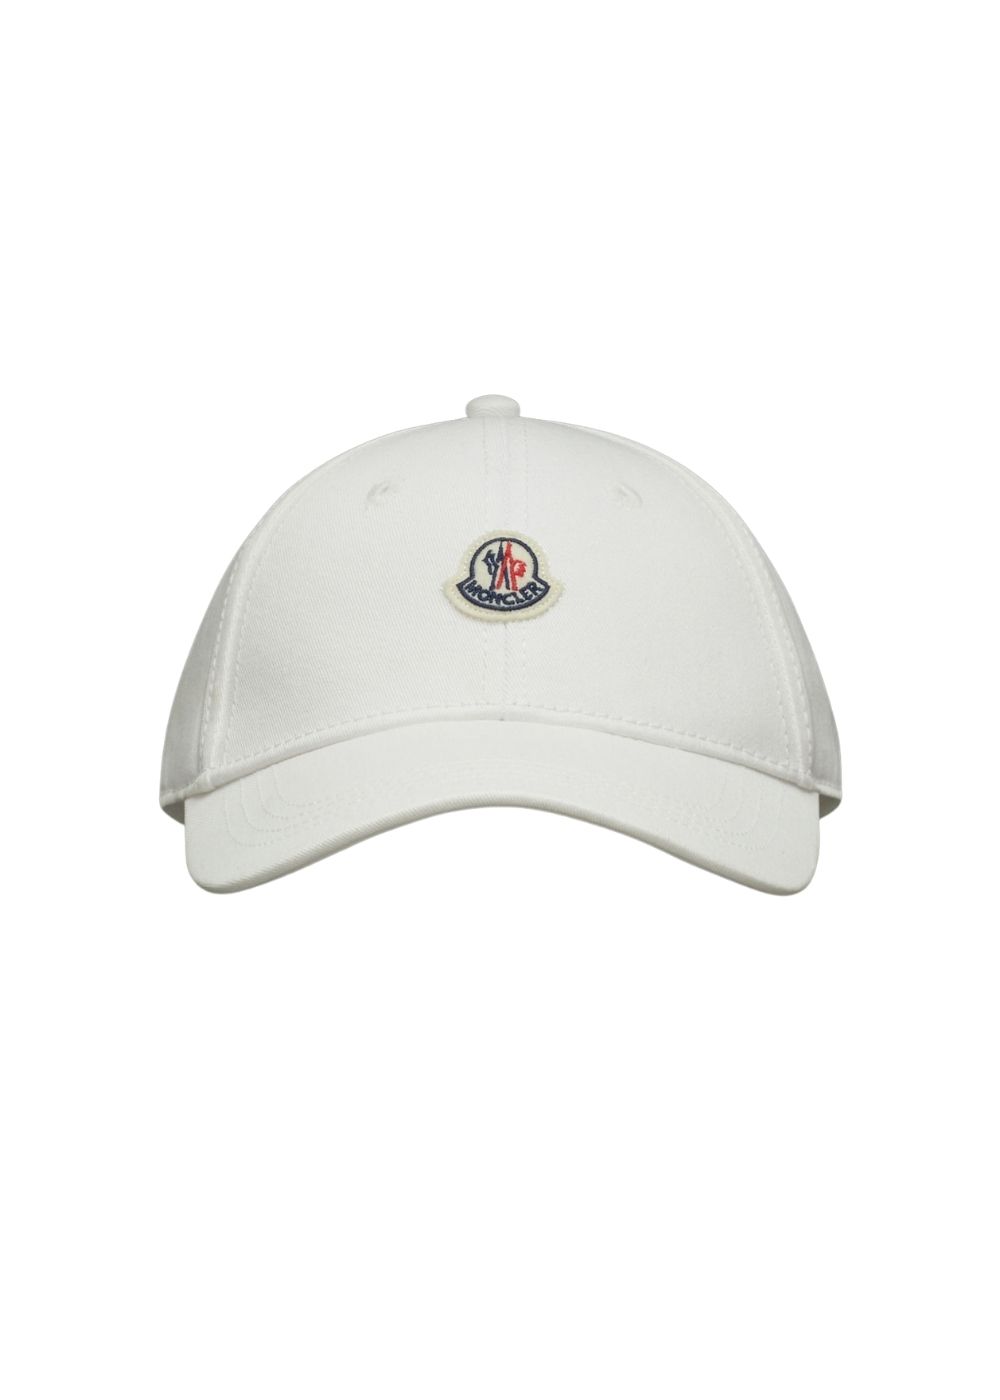 Featured image for “Moncler Cappello Baseball”